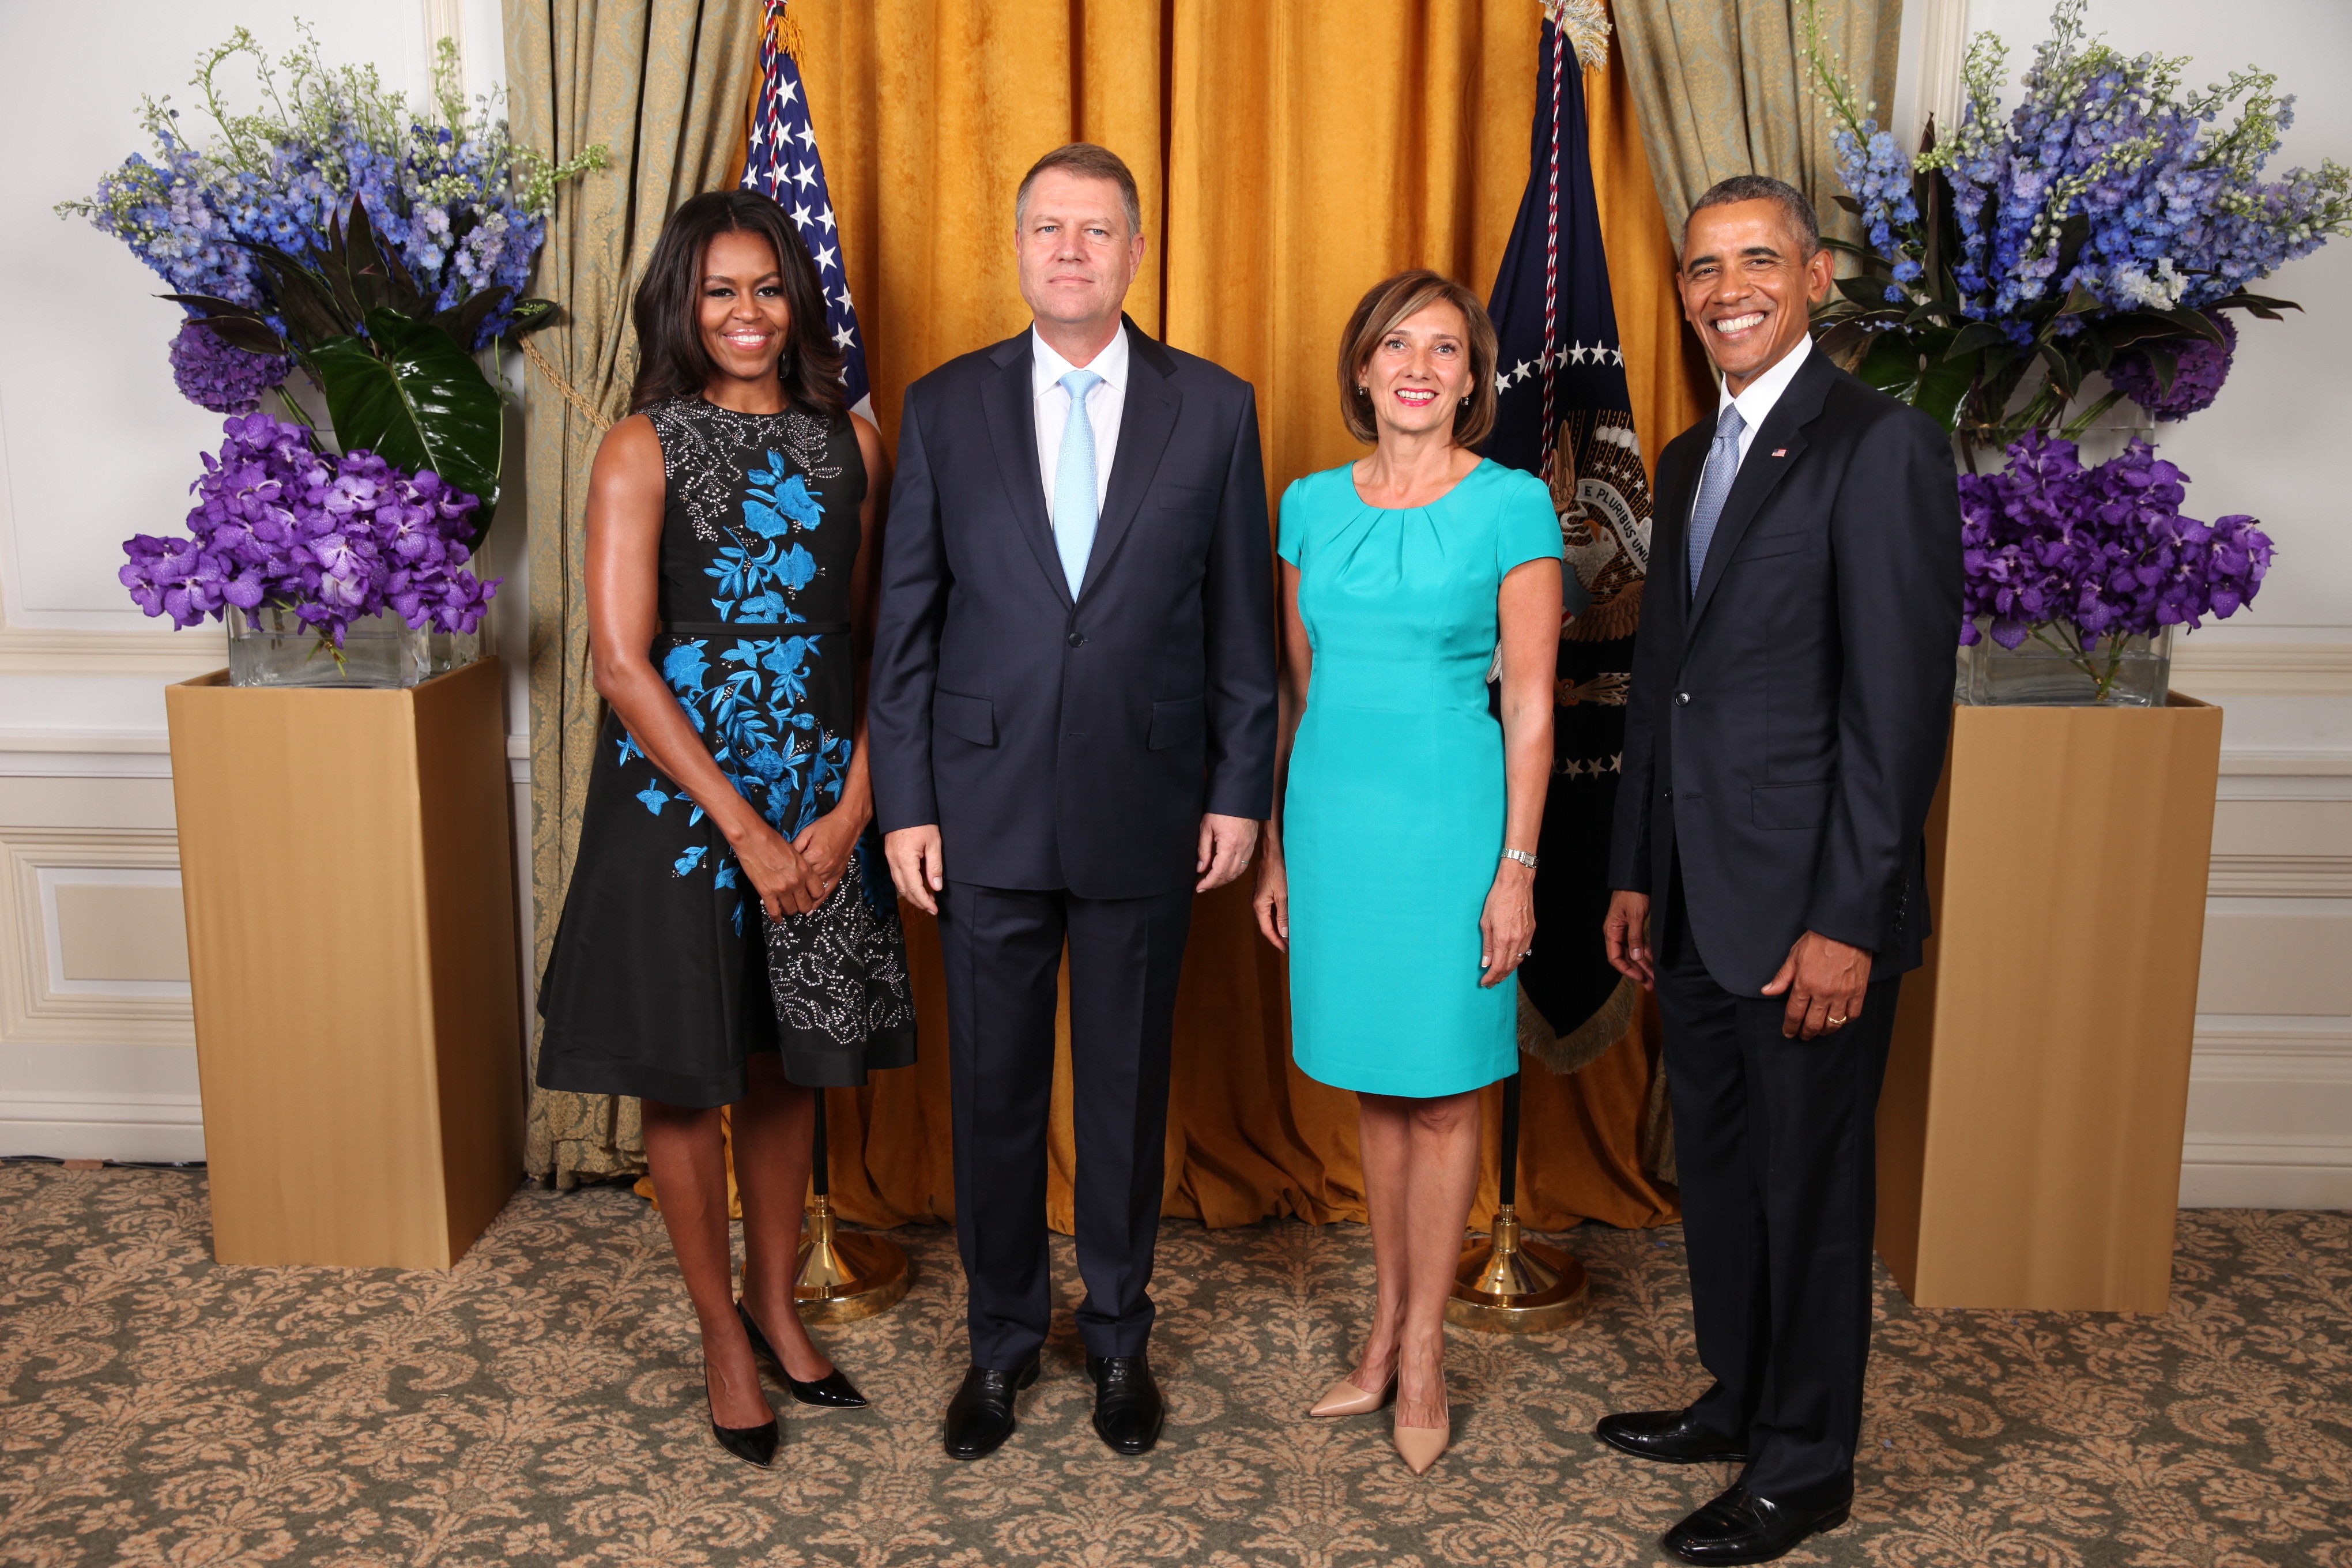 President Barack Obama and First Lady Michelle Obama greet His Excellency Klaus Werner Iohannis, The President of Romania, And Mrs. Iohannis during the United Nations General Assembly reception at the New York Palace Hotel in New York, N.Y., Sept. 28, 2015. (Official White House Photo by Lawrence Jackson)